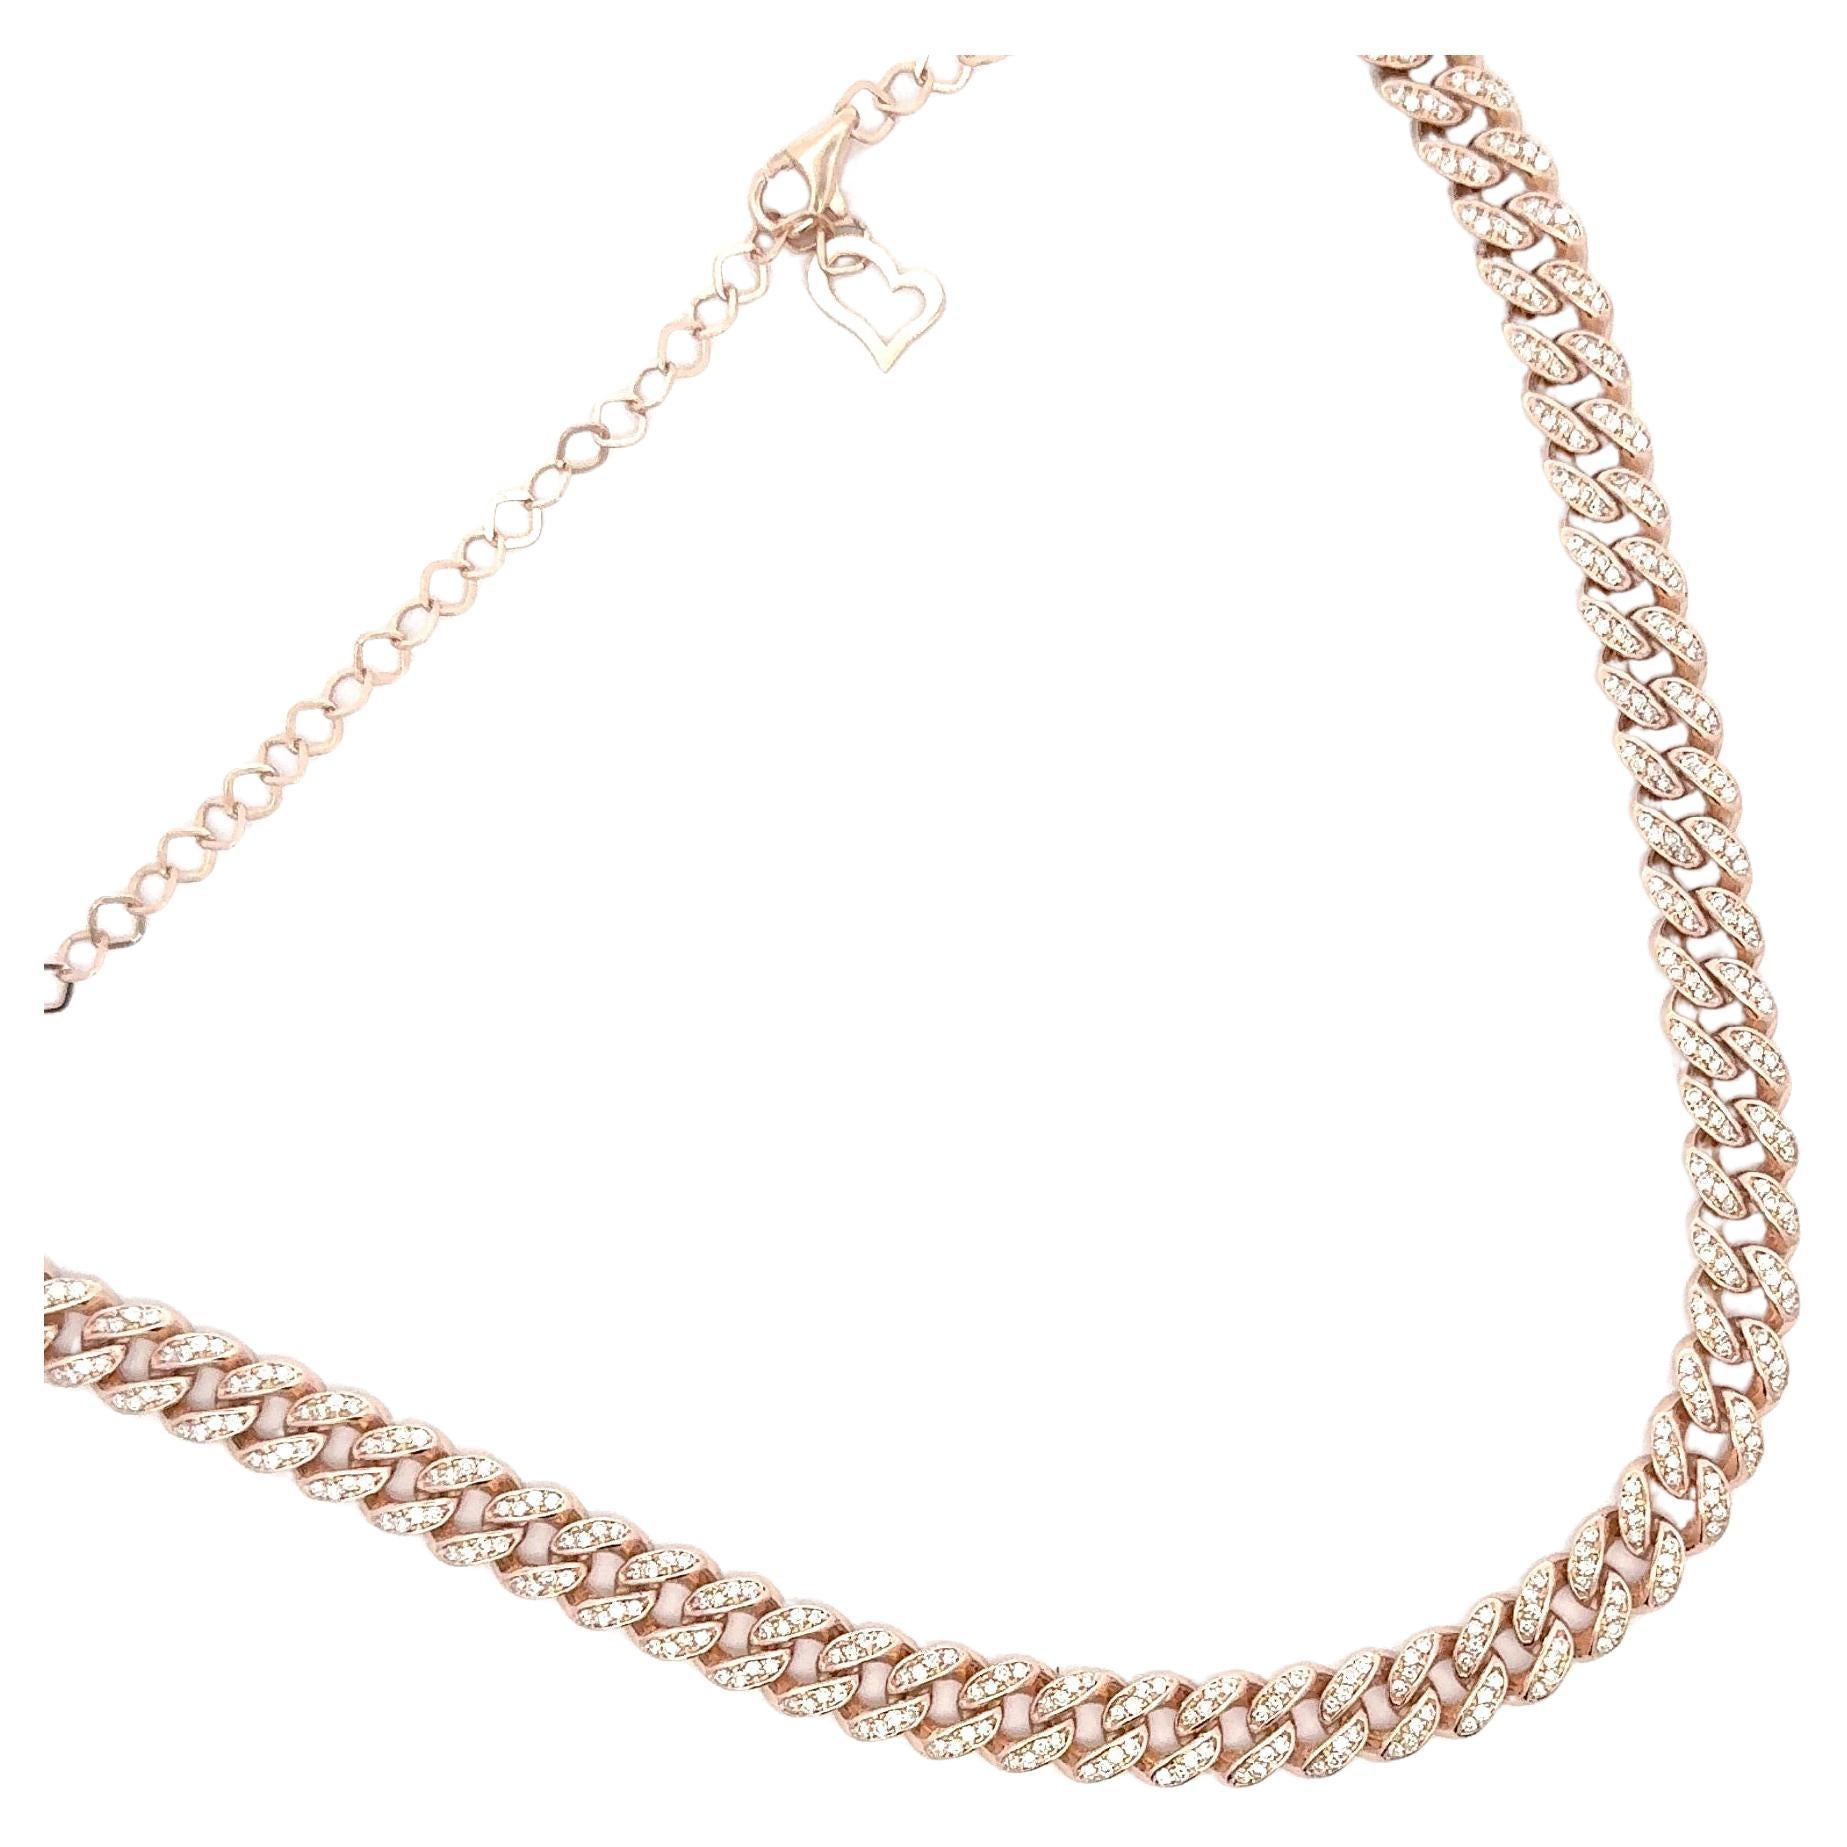 14 Karat rose gold necklace featuring 400 round brilliants in a Cuban link chain weighing 1.88 carats.
Color F
Clarity VS1-VS2

Can be made in white & yellow gold. 
DM for more info